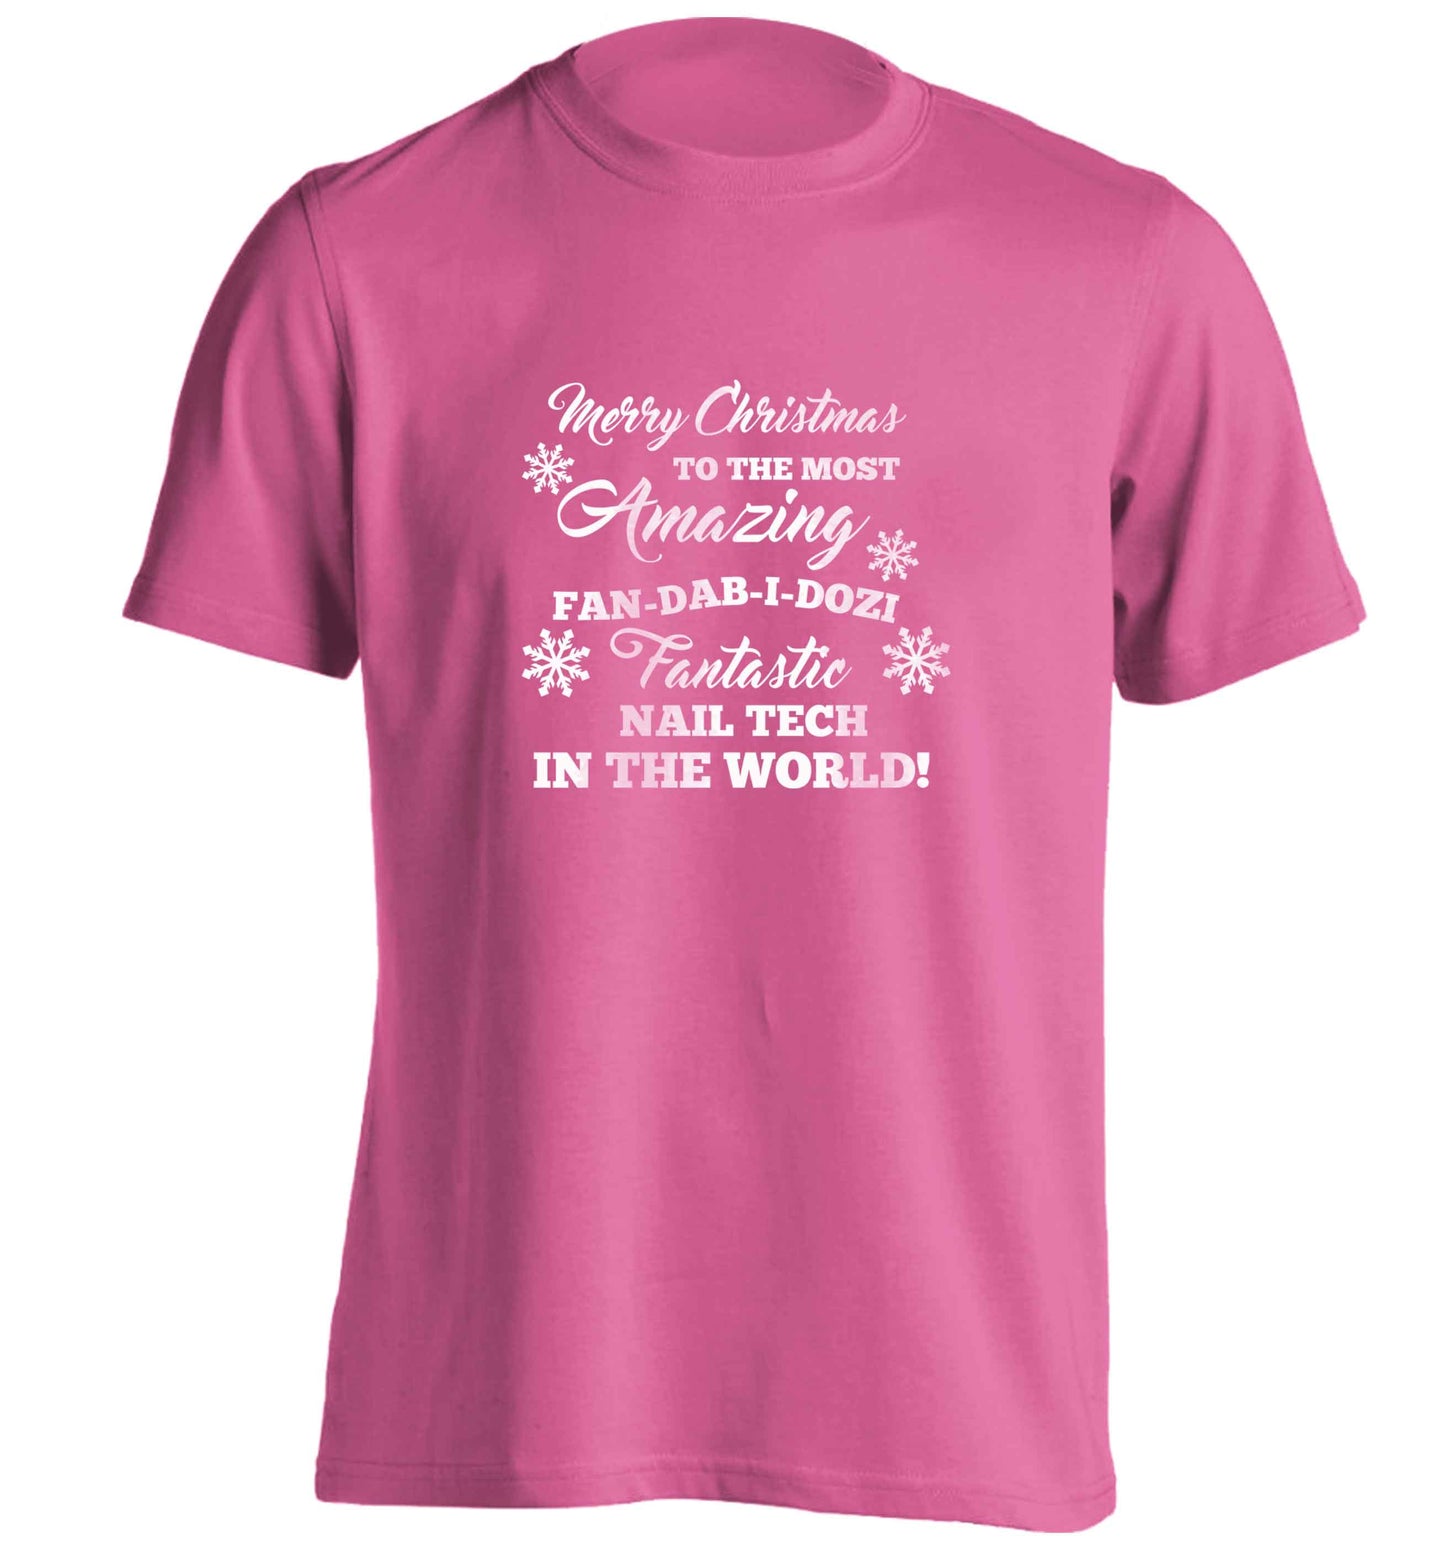 Merry Christmas to the most amazing fan-dab-i-dozi fantasic nail technician in the world adults unisex pink Tshirt 2XL